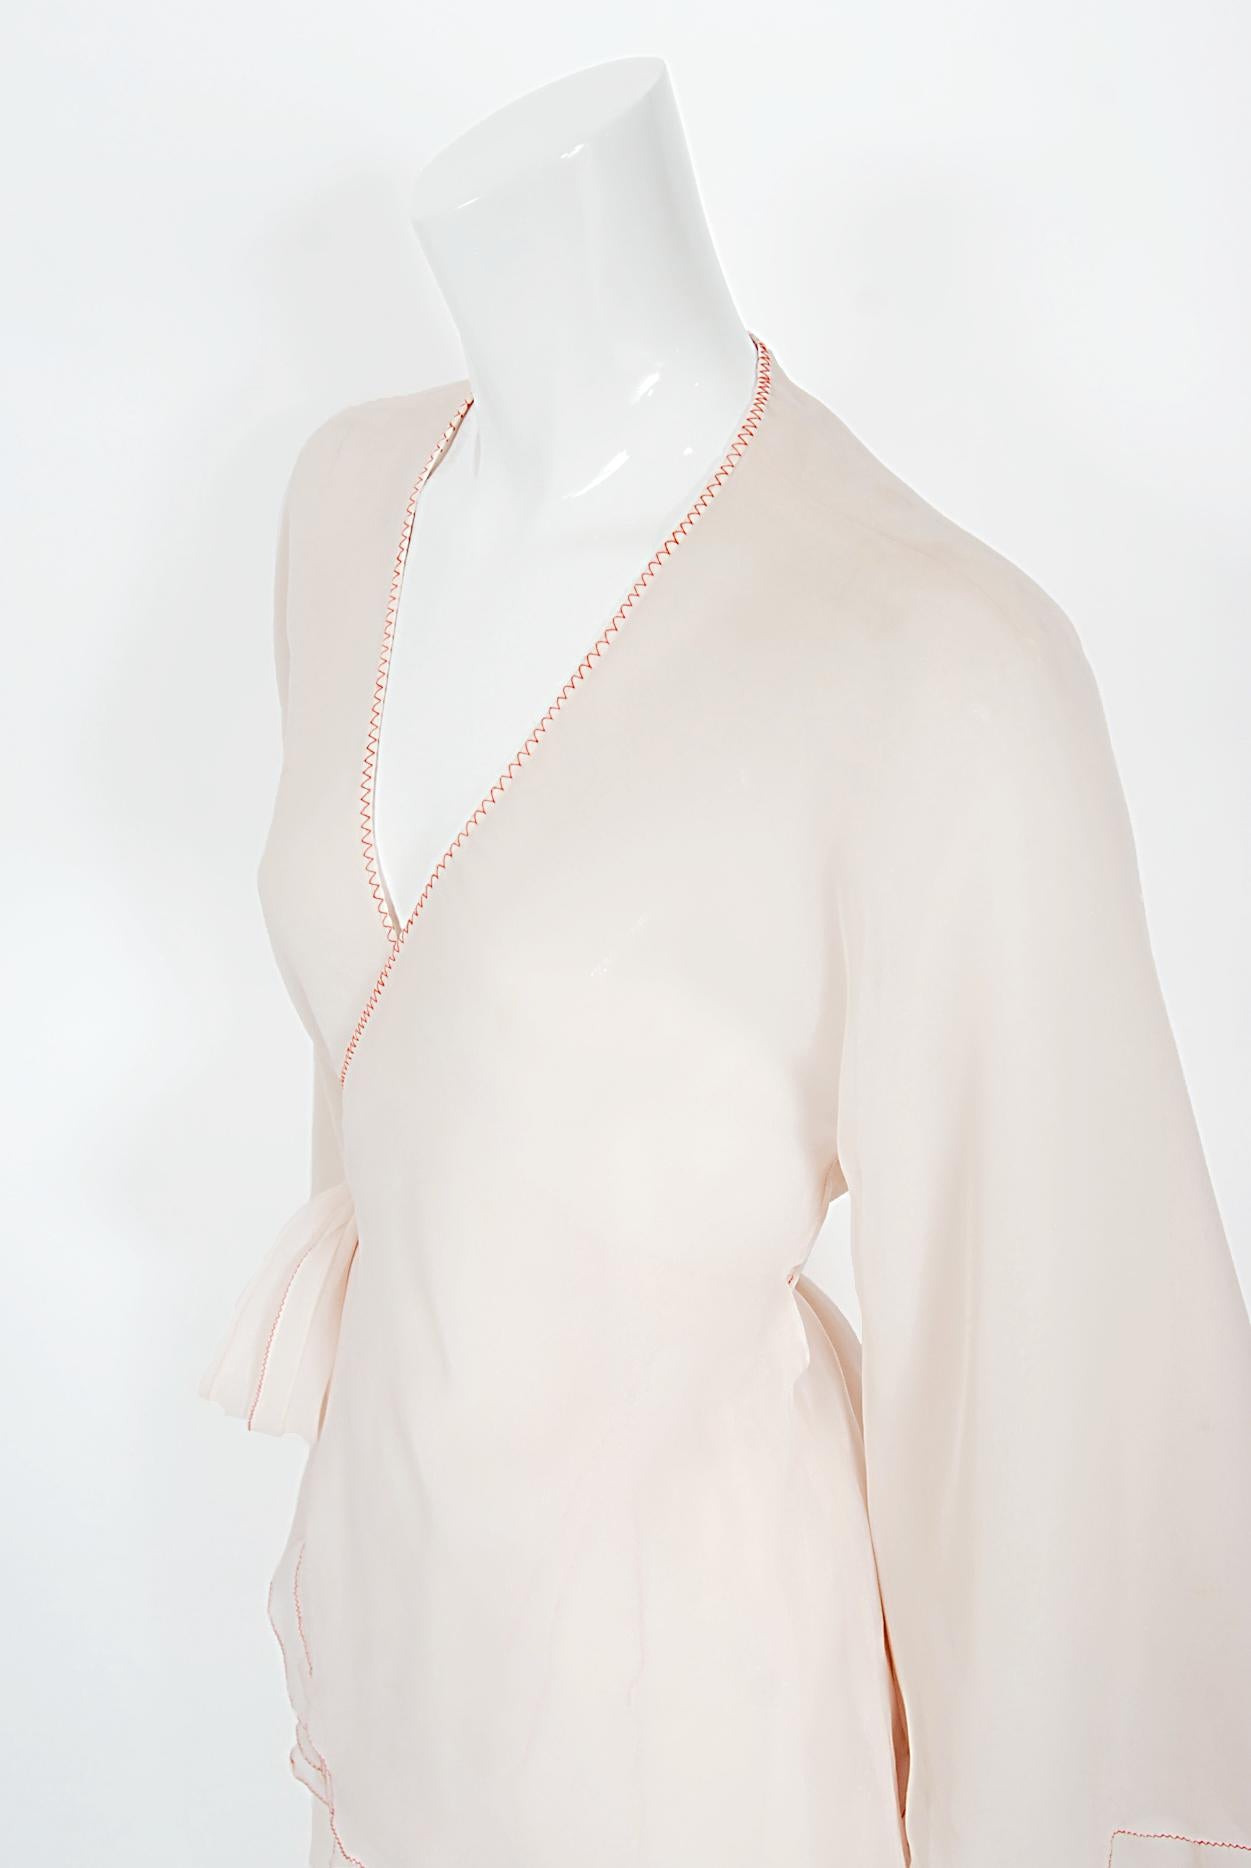 Vintage 1970's Stephen Burrows Pale-Pink Layered Chiffon Wrap Blouse Pantsuit In Good Condition For Sale In Beverly Hills, CA